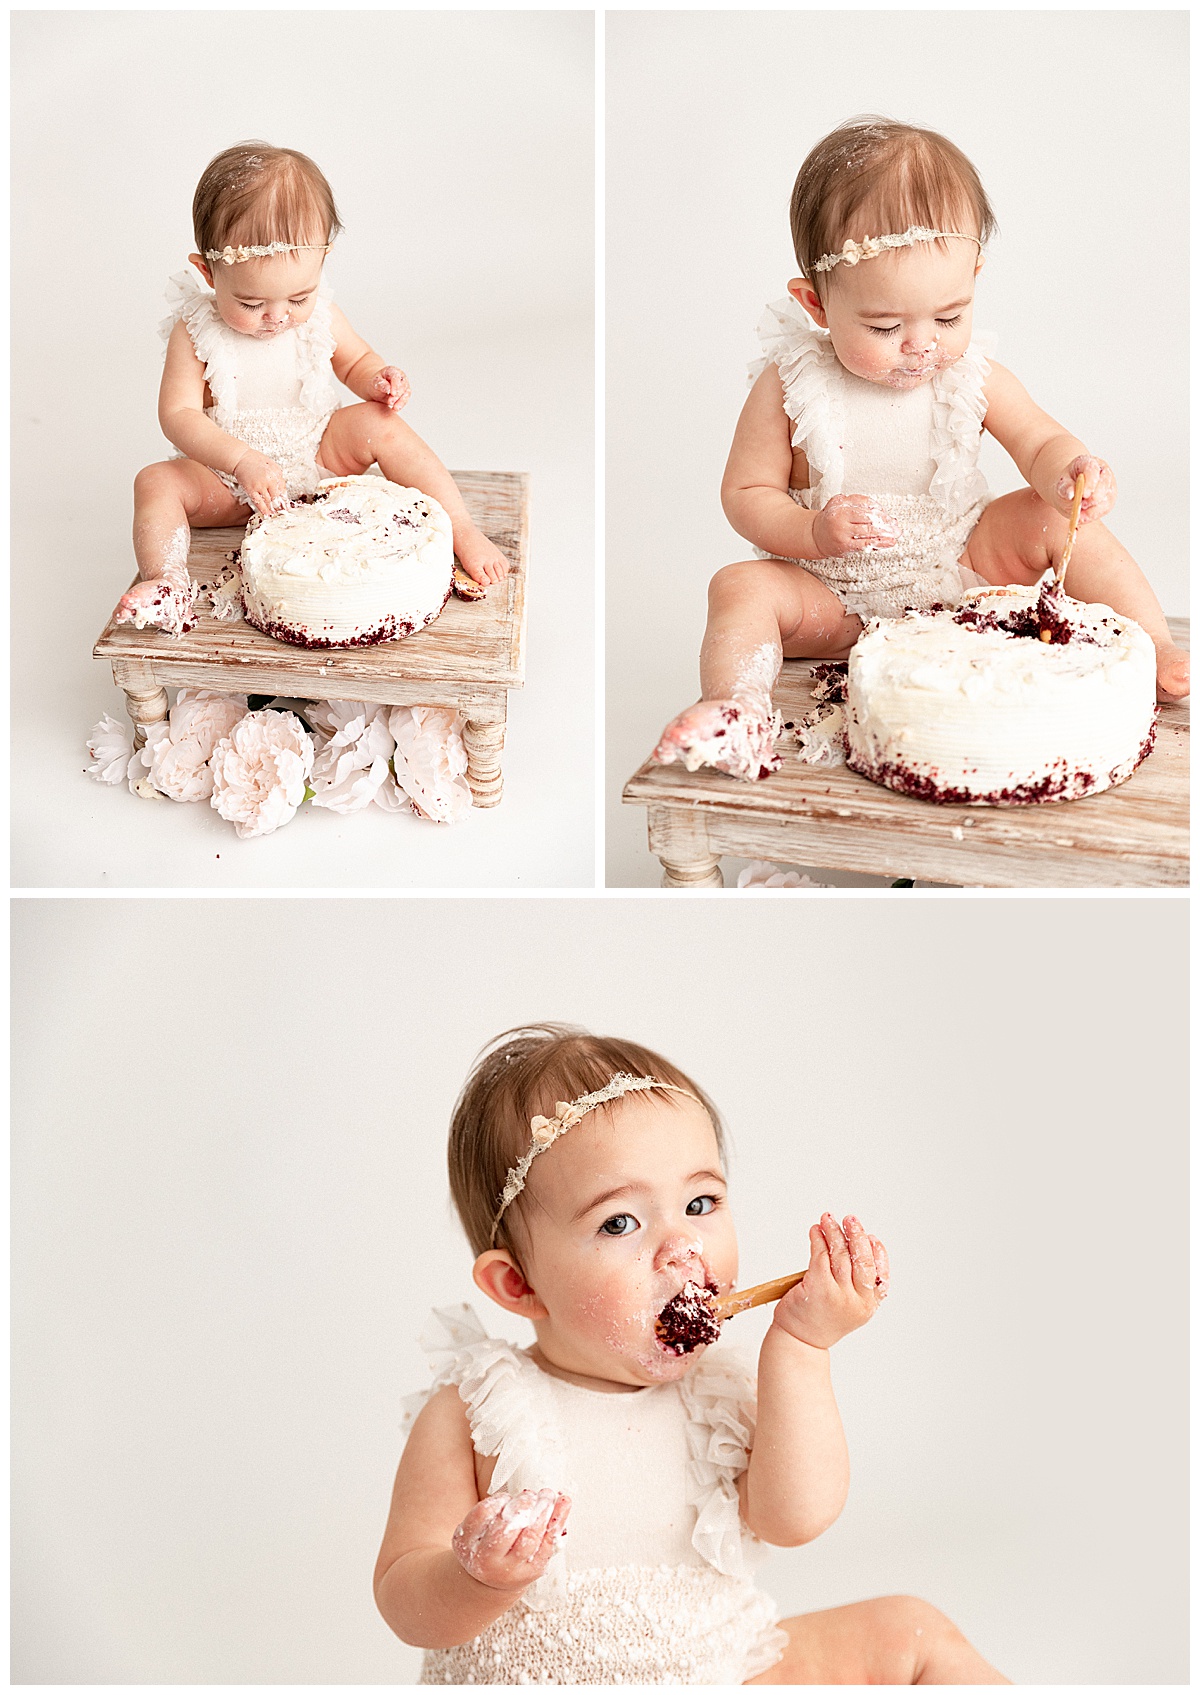 Baby putting cake in mouth for First Birthday Cake Smash